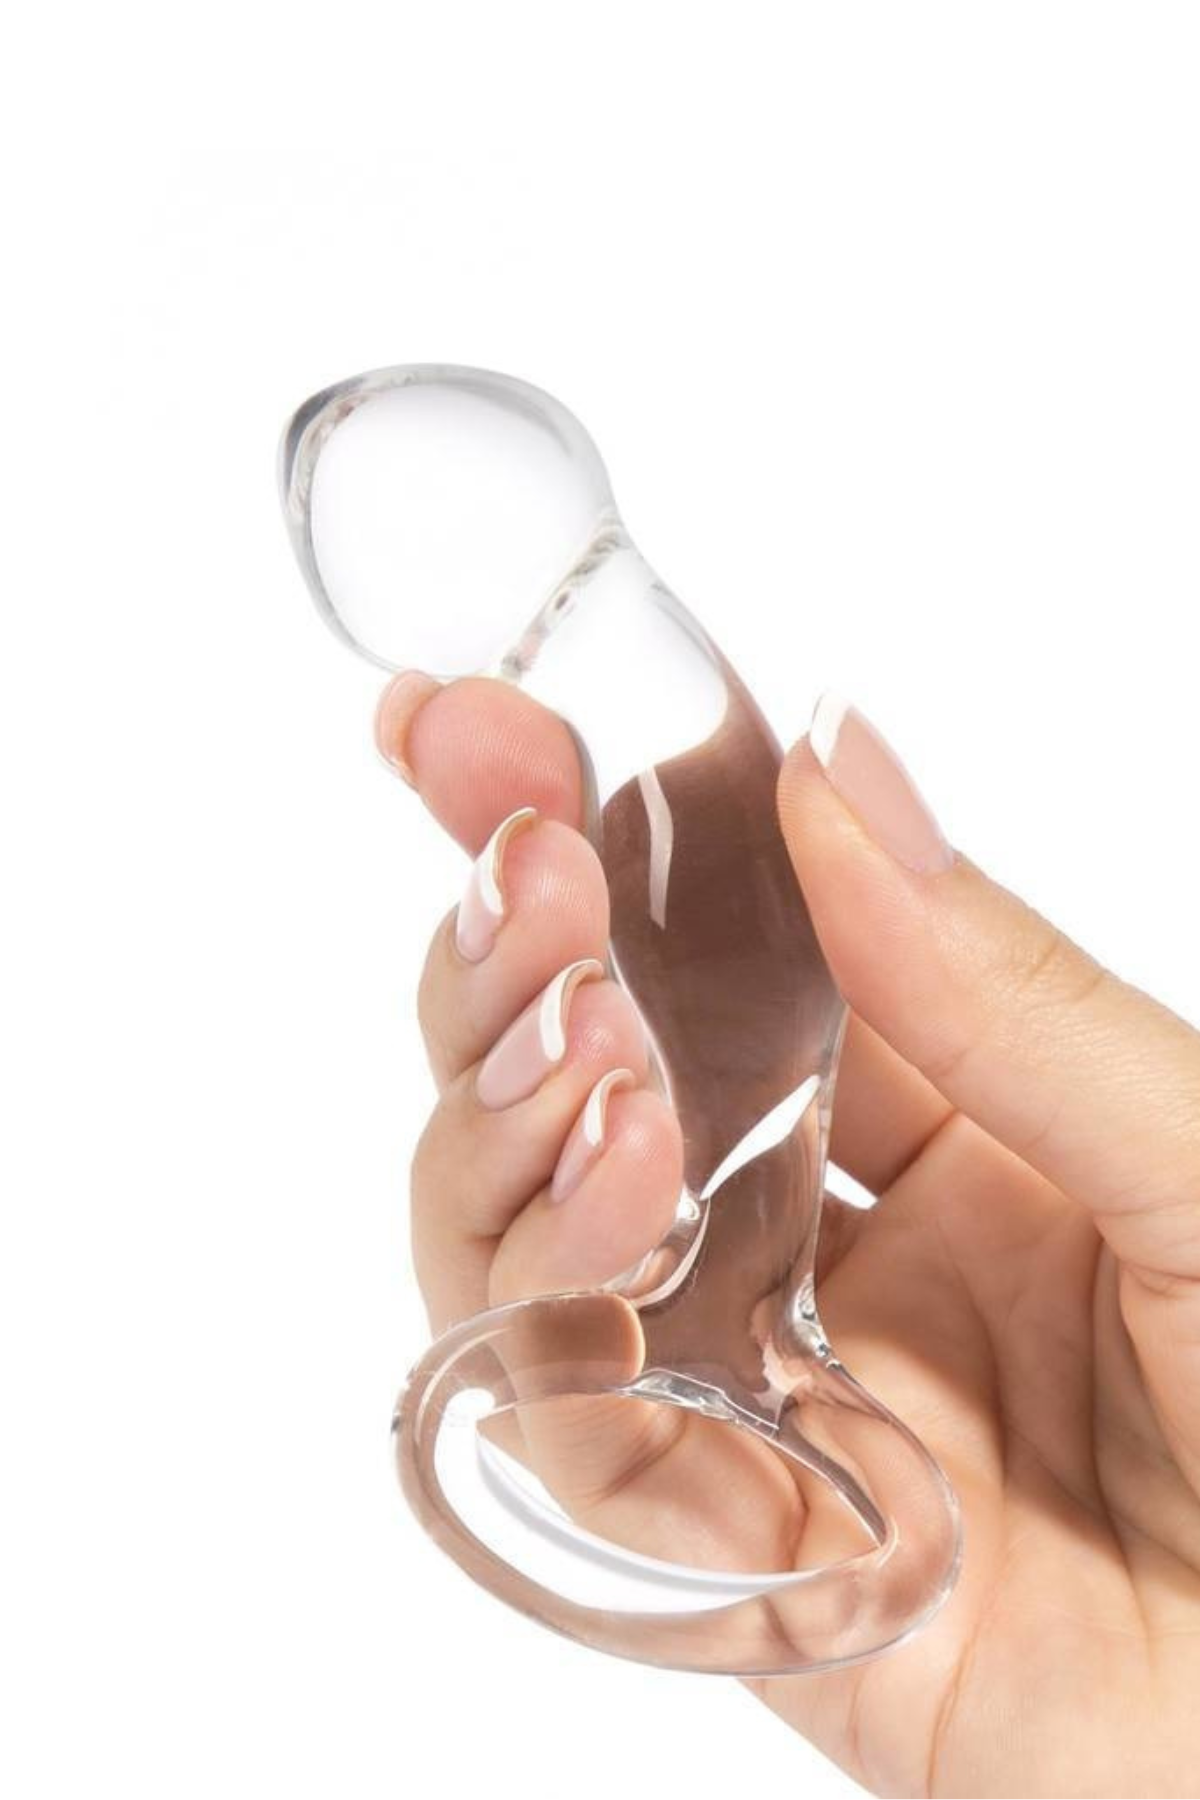 The Drill Sergeant | Glass Prostate Massager